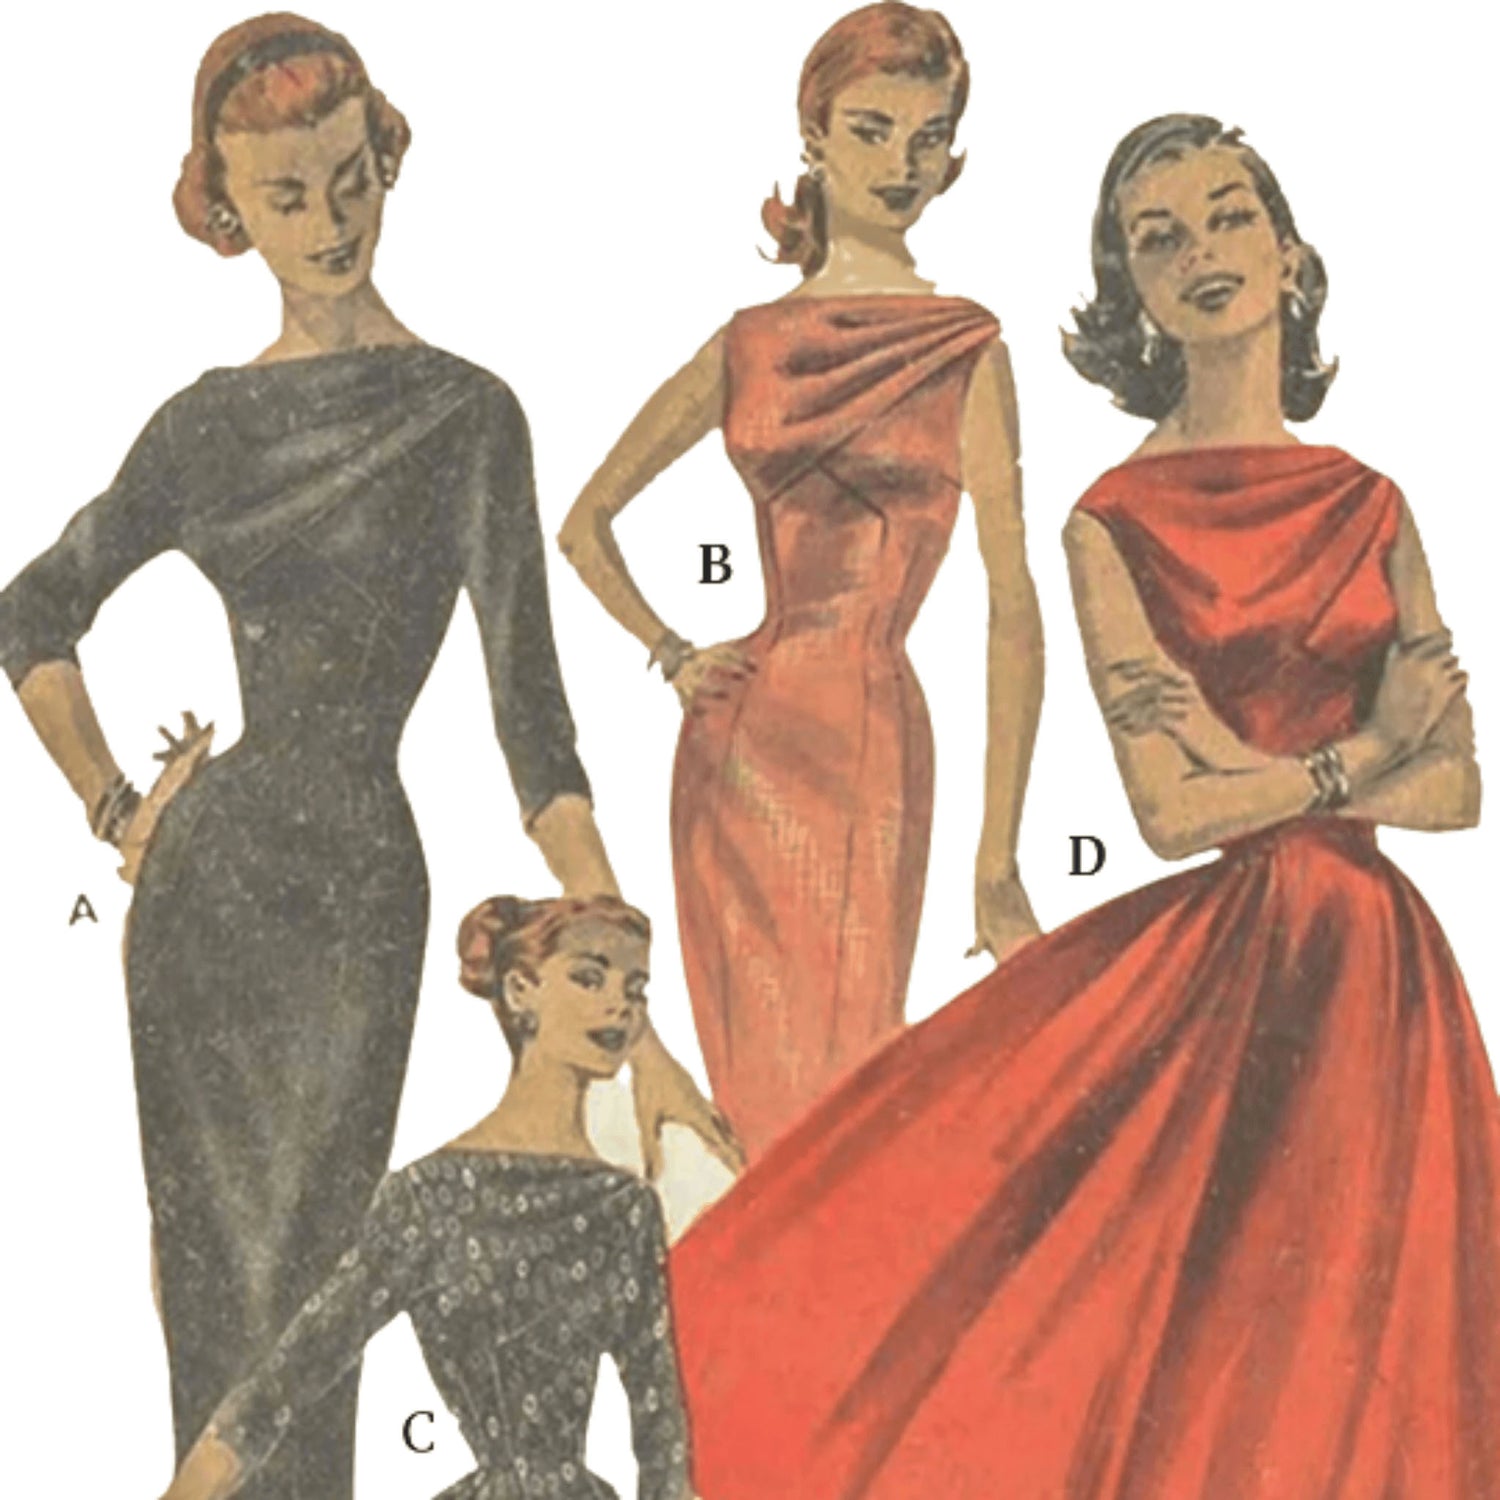 PDF - 1950s Pattern, Princess Line Dress in Four Elegant Styles - Multi sizes - Instantly Print at Home - Vintage Sewing Pattern Company